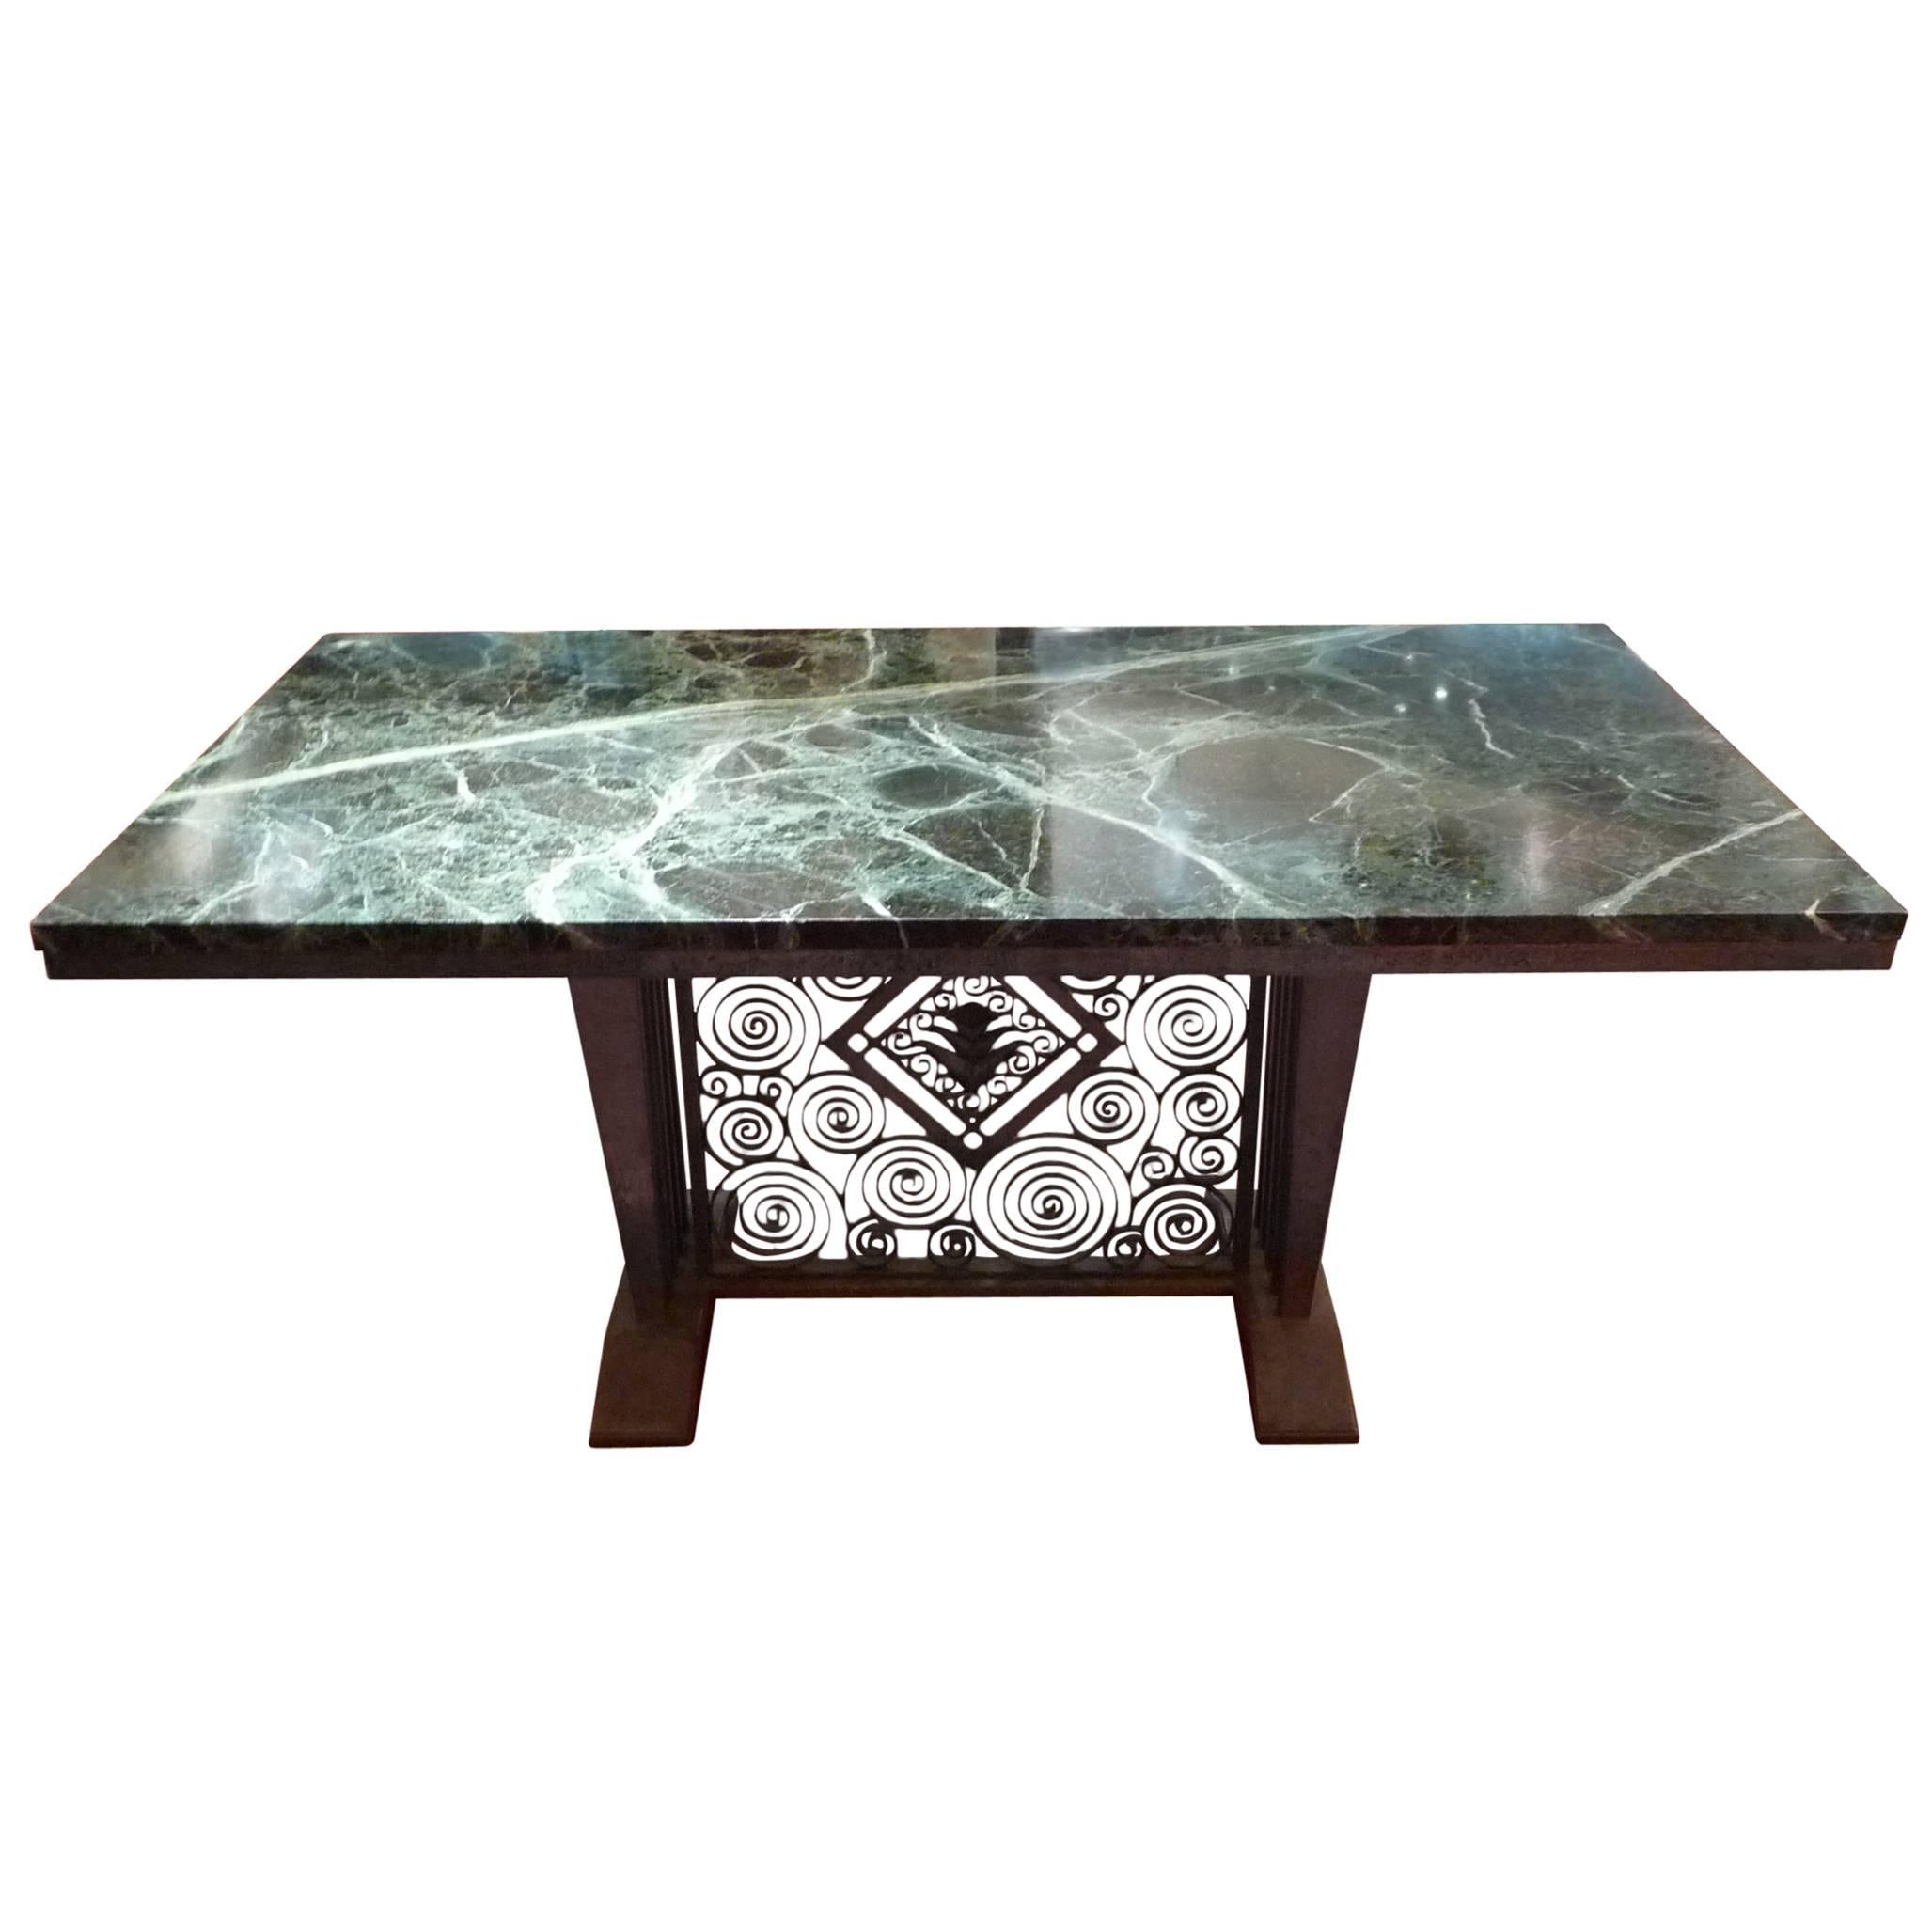 Edgar Brandt, a Green Marble and Wrought Iron Table, Stamped E Brandt For Sale